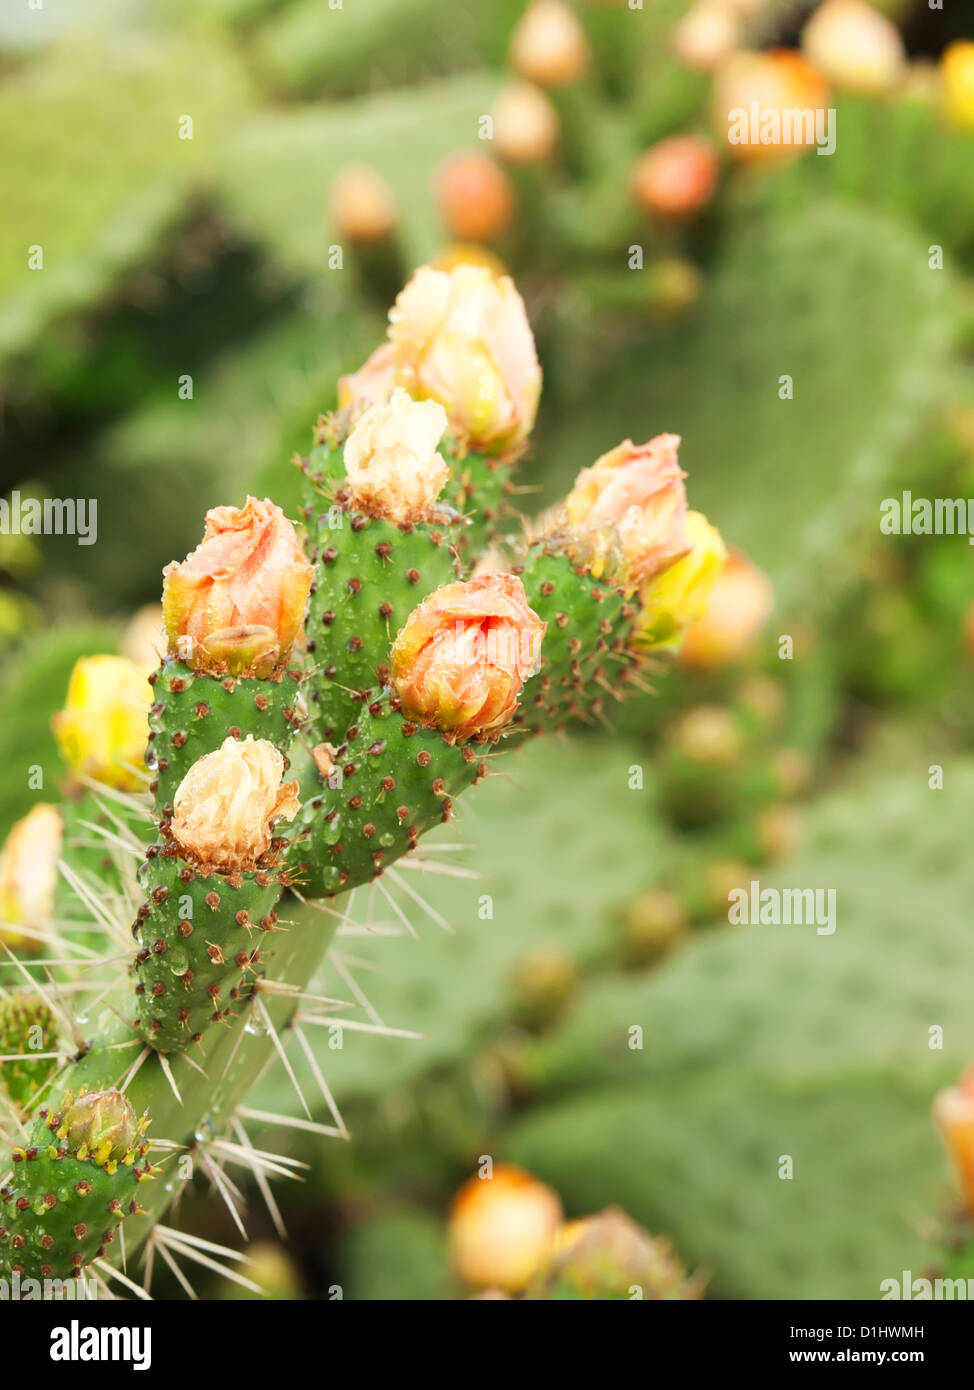 Blooming Prickly Pear or Paddle cactus with yellow flowers in Andalusia, Spain Stock Photo